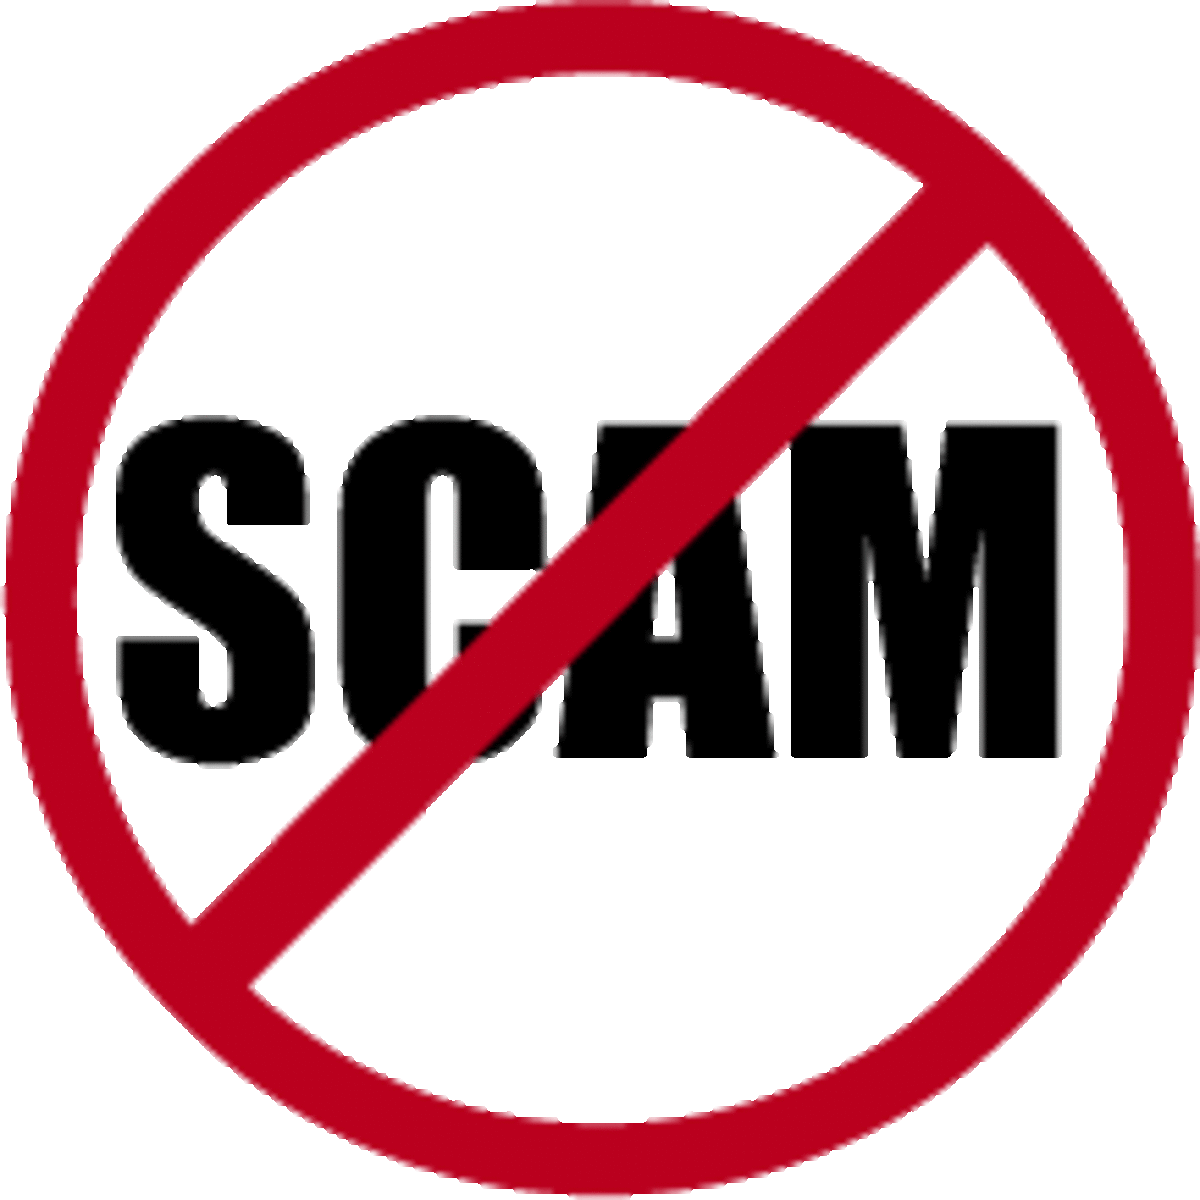 How to Identify and Avoid Job Scams